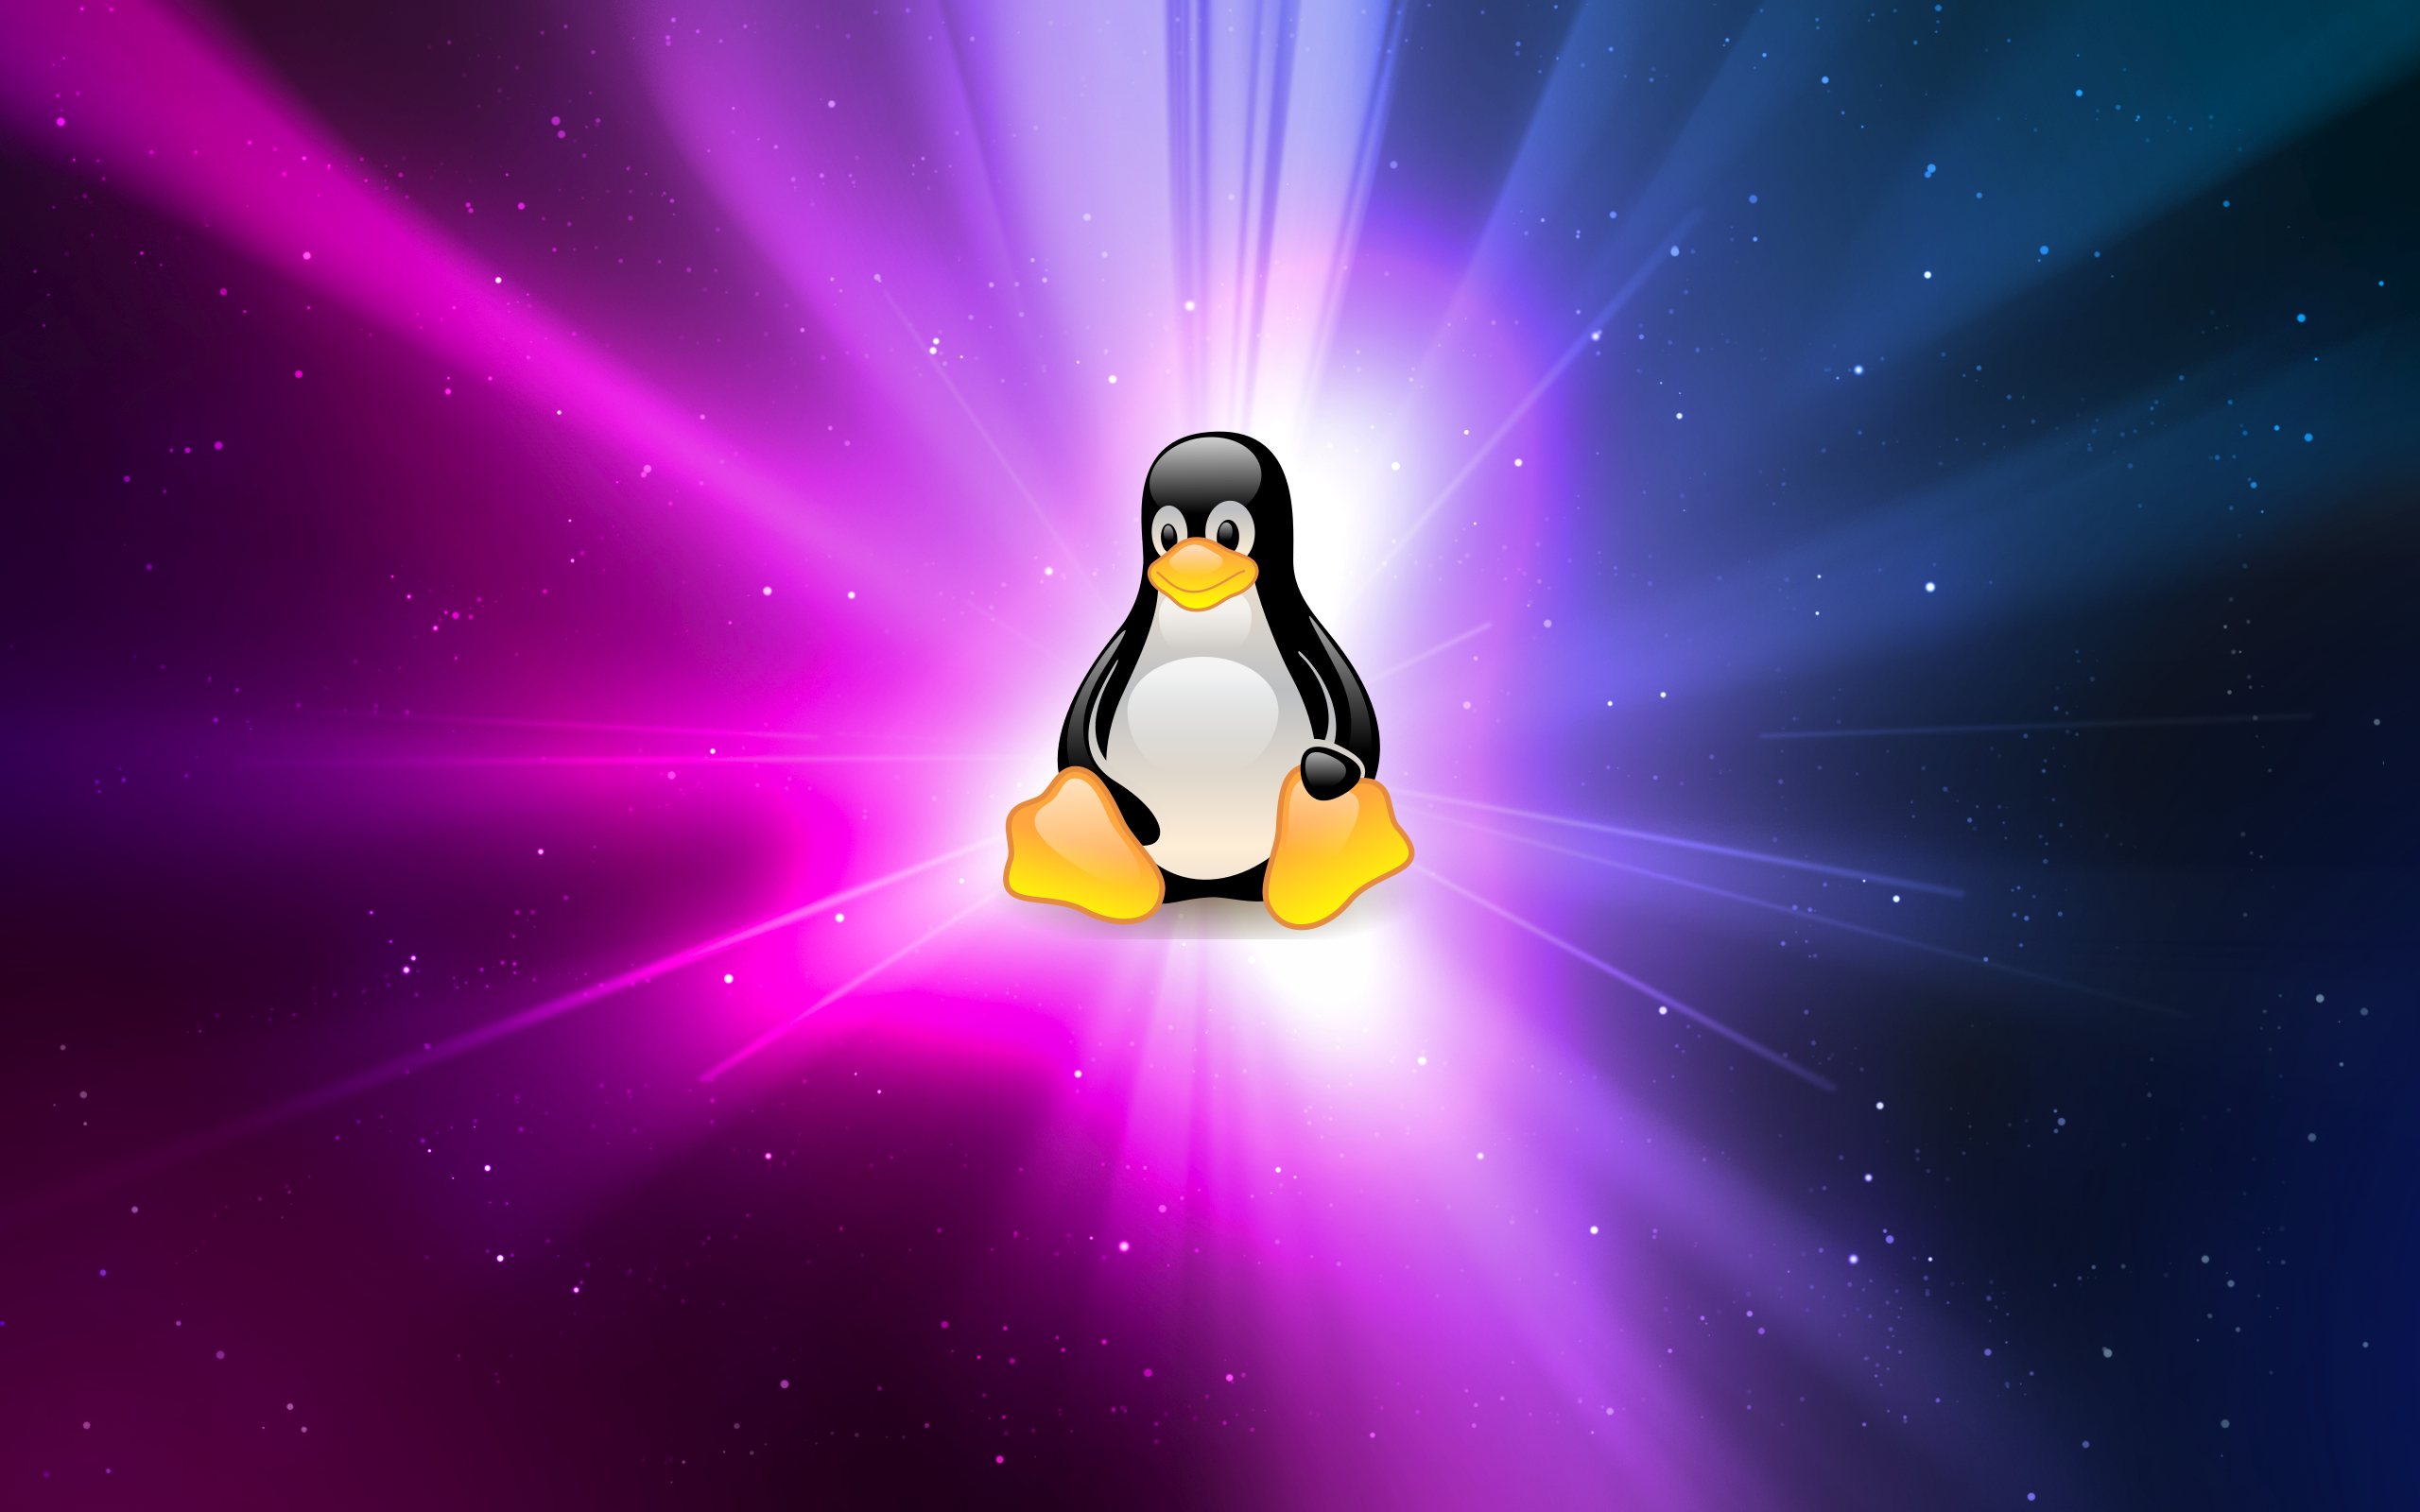  download Download 45 Awesome Linux Wallpapers [2560x1600] for 2560x1600